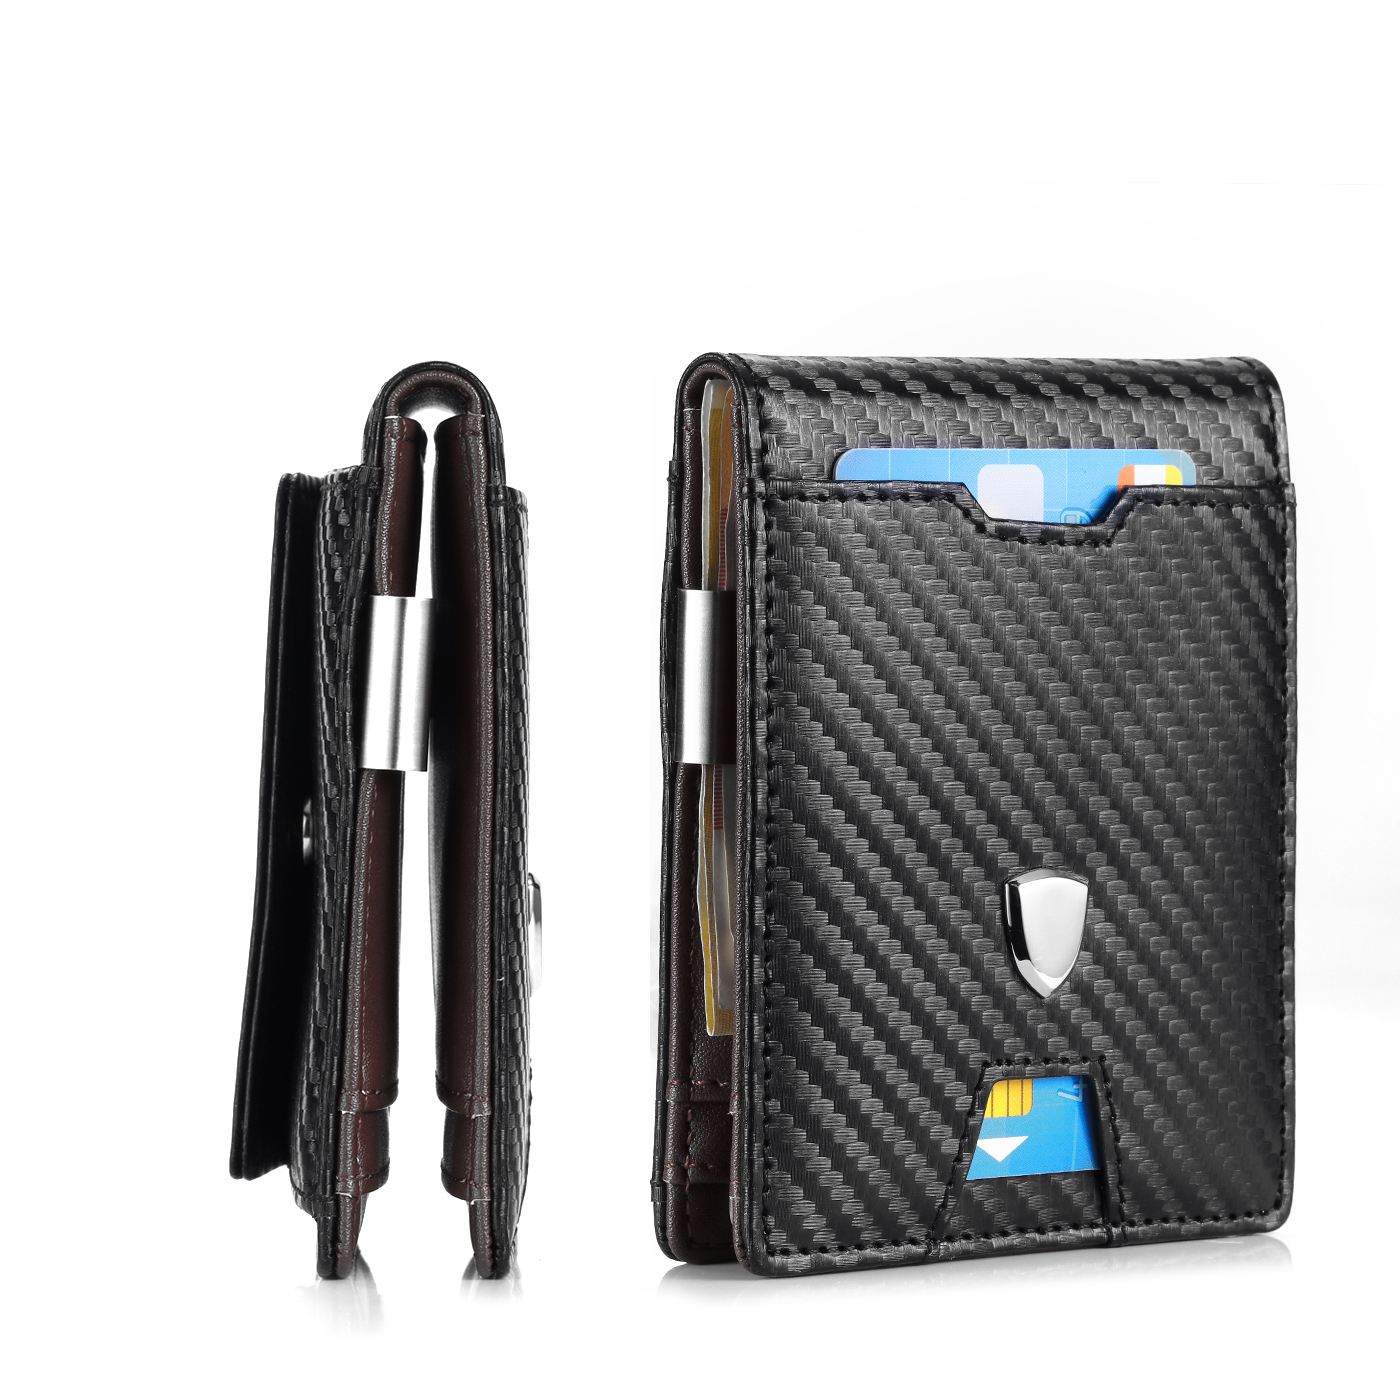 2020 New Double Layer Security Credit Card Purse RFID Blocking Wallet Slim Aluminum Case Holder Wallet for Men Women